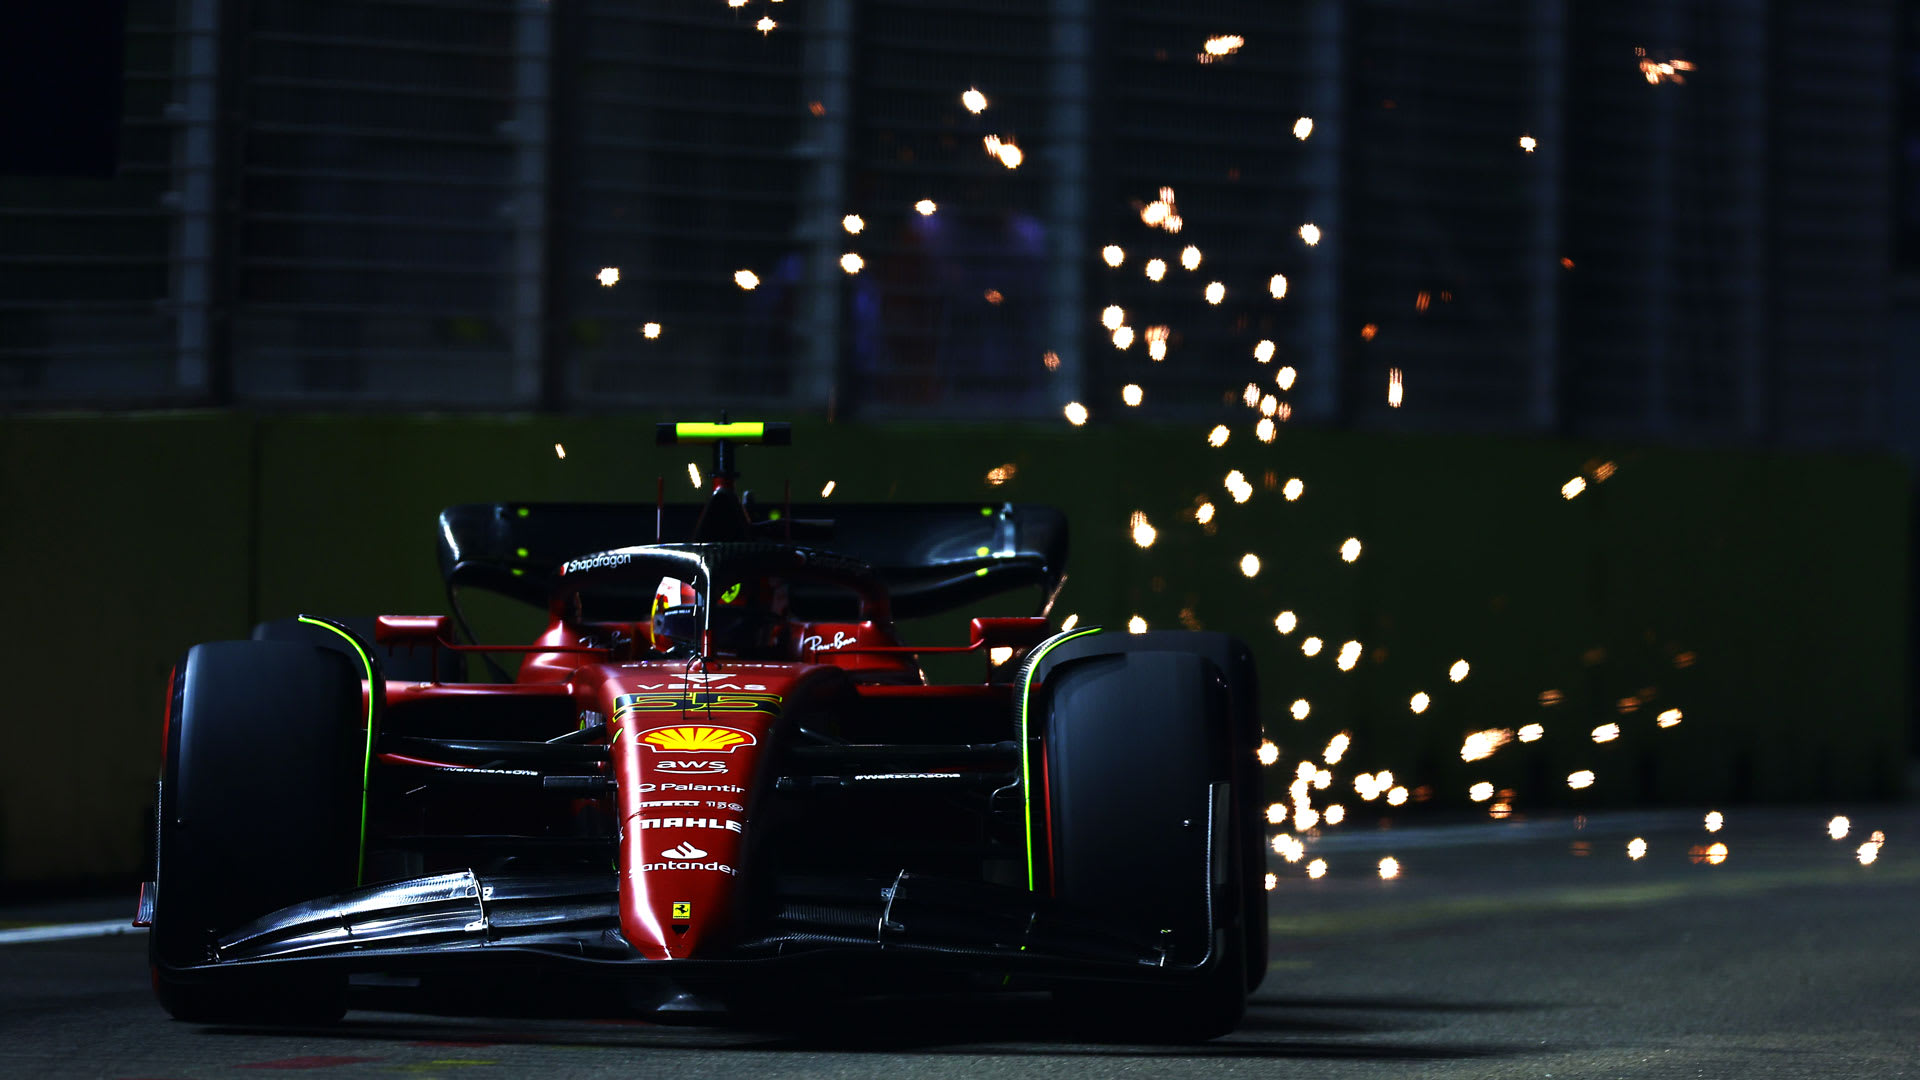 2022 Singapore Grand Prix FP2 report and highlights: Sainz leads Leclerc as Ferrari after 1-2 in second practice